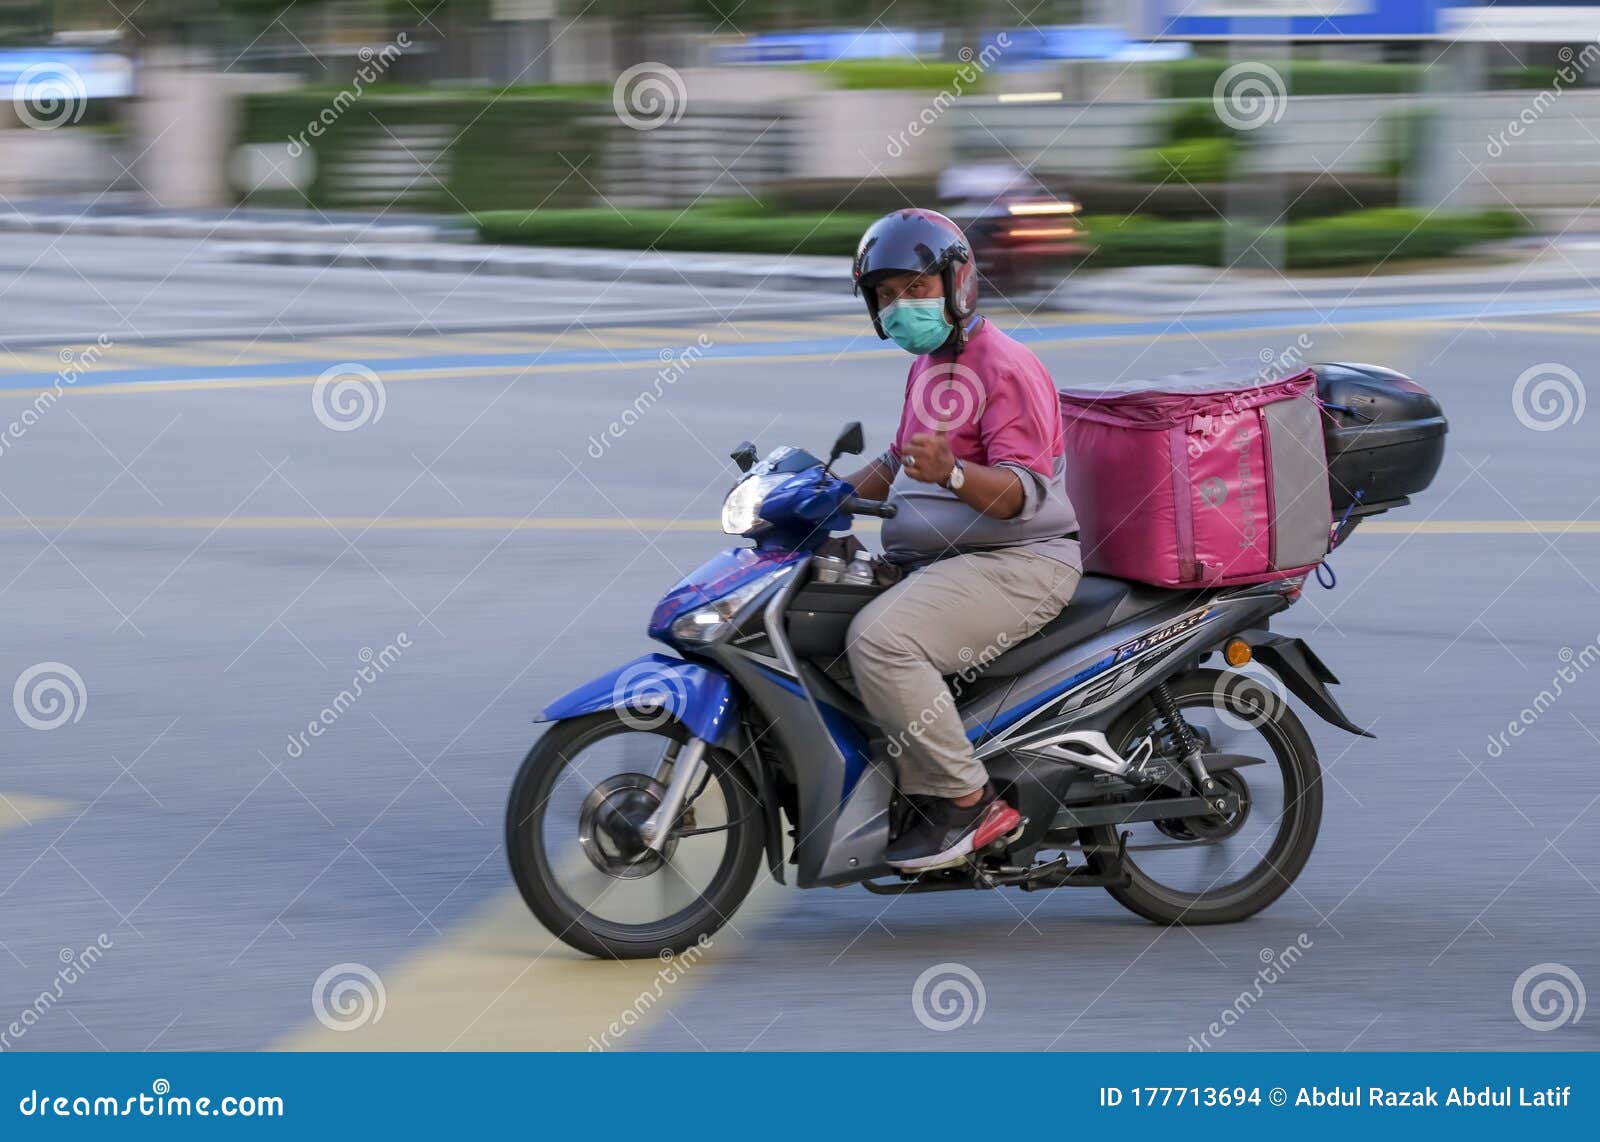 Food Delivery Service Rider For Foodpanda Editorial Stock Image Image Of Motorcycle Phone 177713694